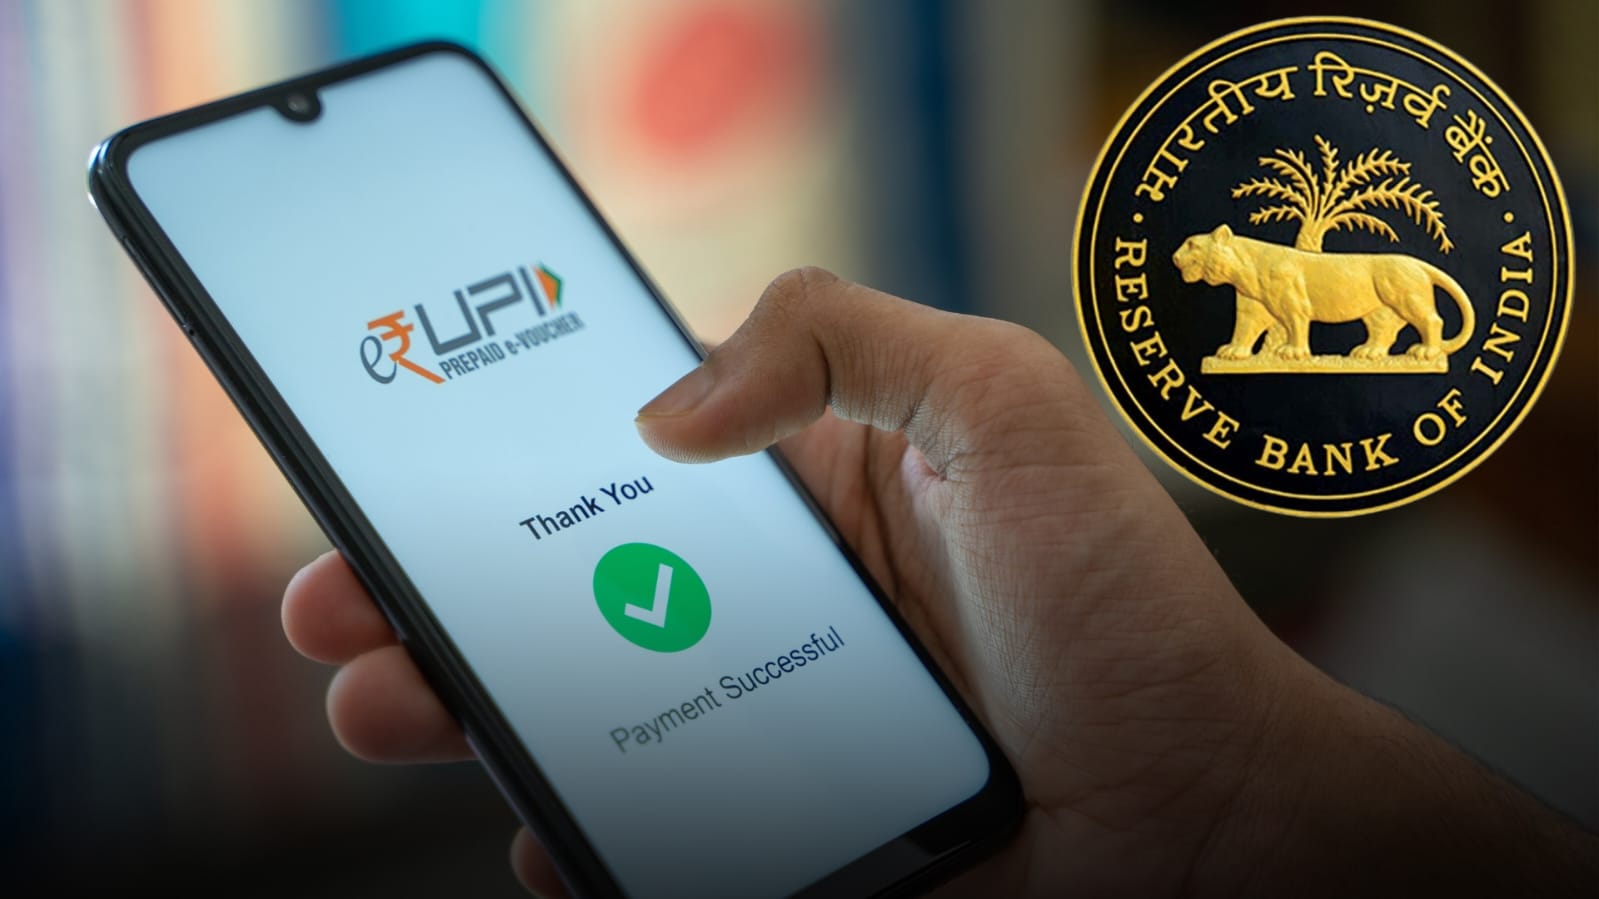 RBI introduces two new UPI features: Cash deposit and PPI wallet interoperability